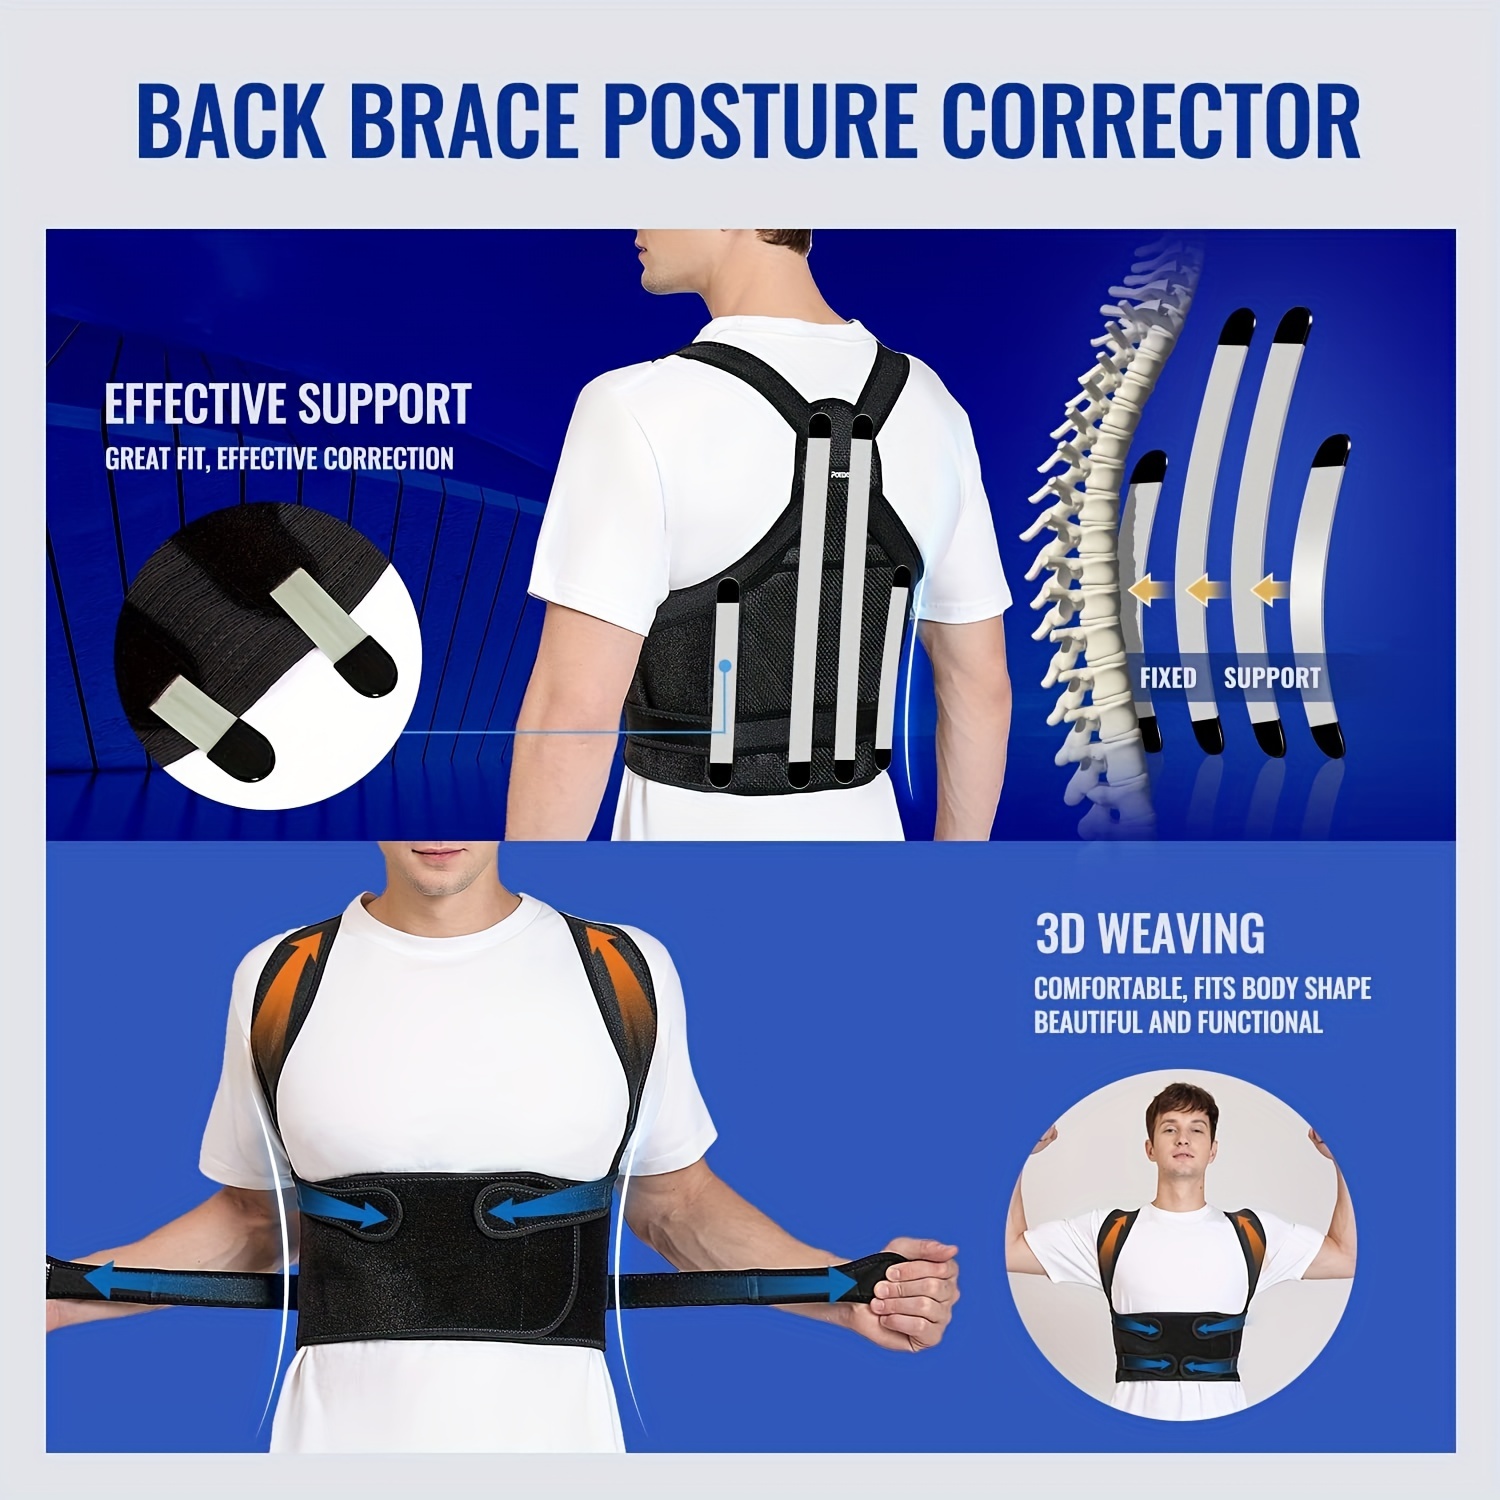 Plus size 3xl bariatric back brace obese support girdle for lower lumbar  back pain in big and tall extra large heavy overweight